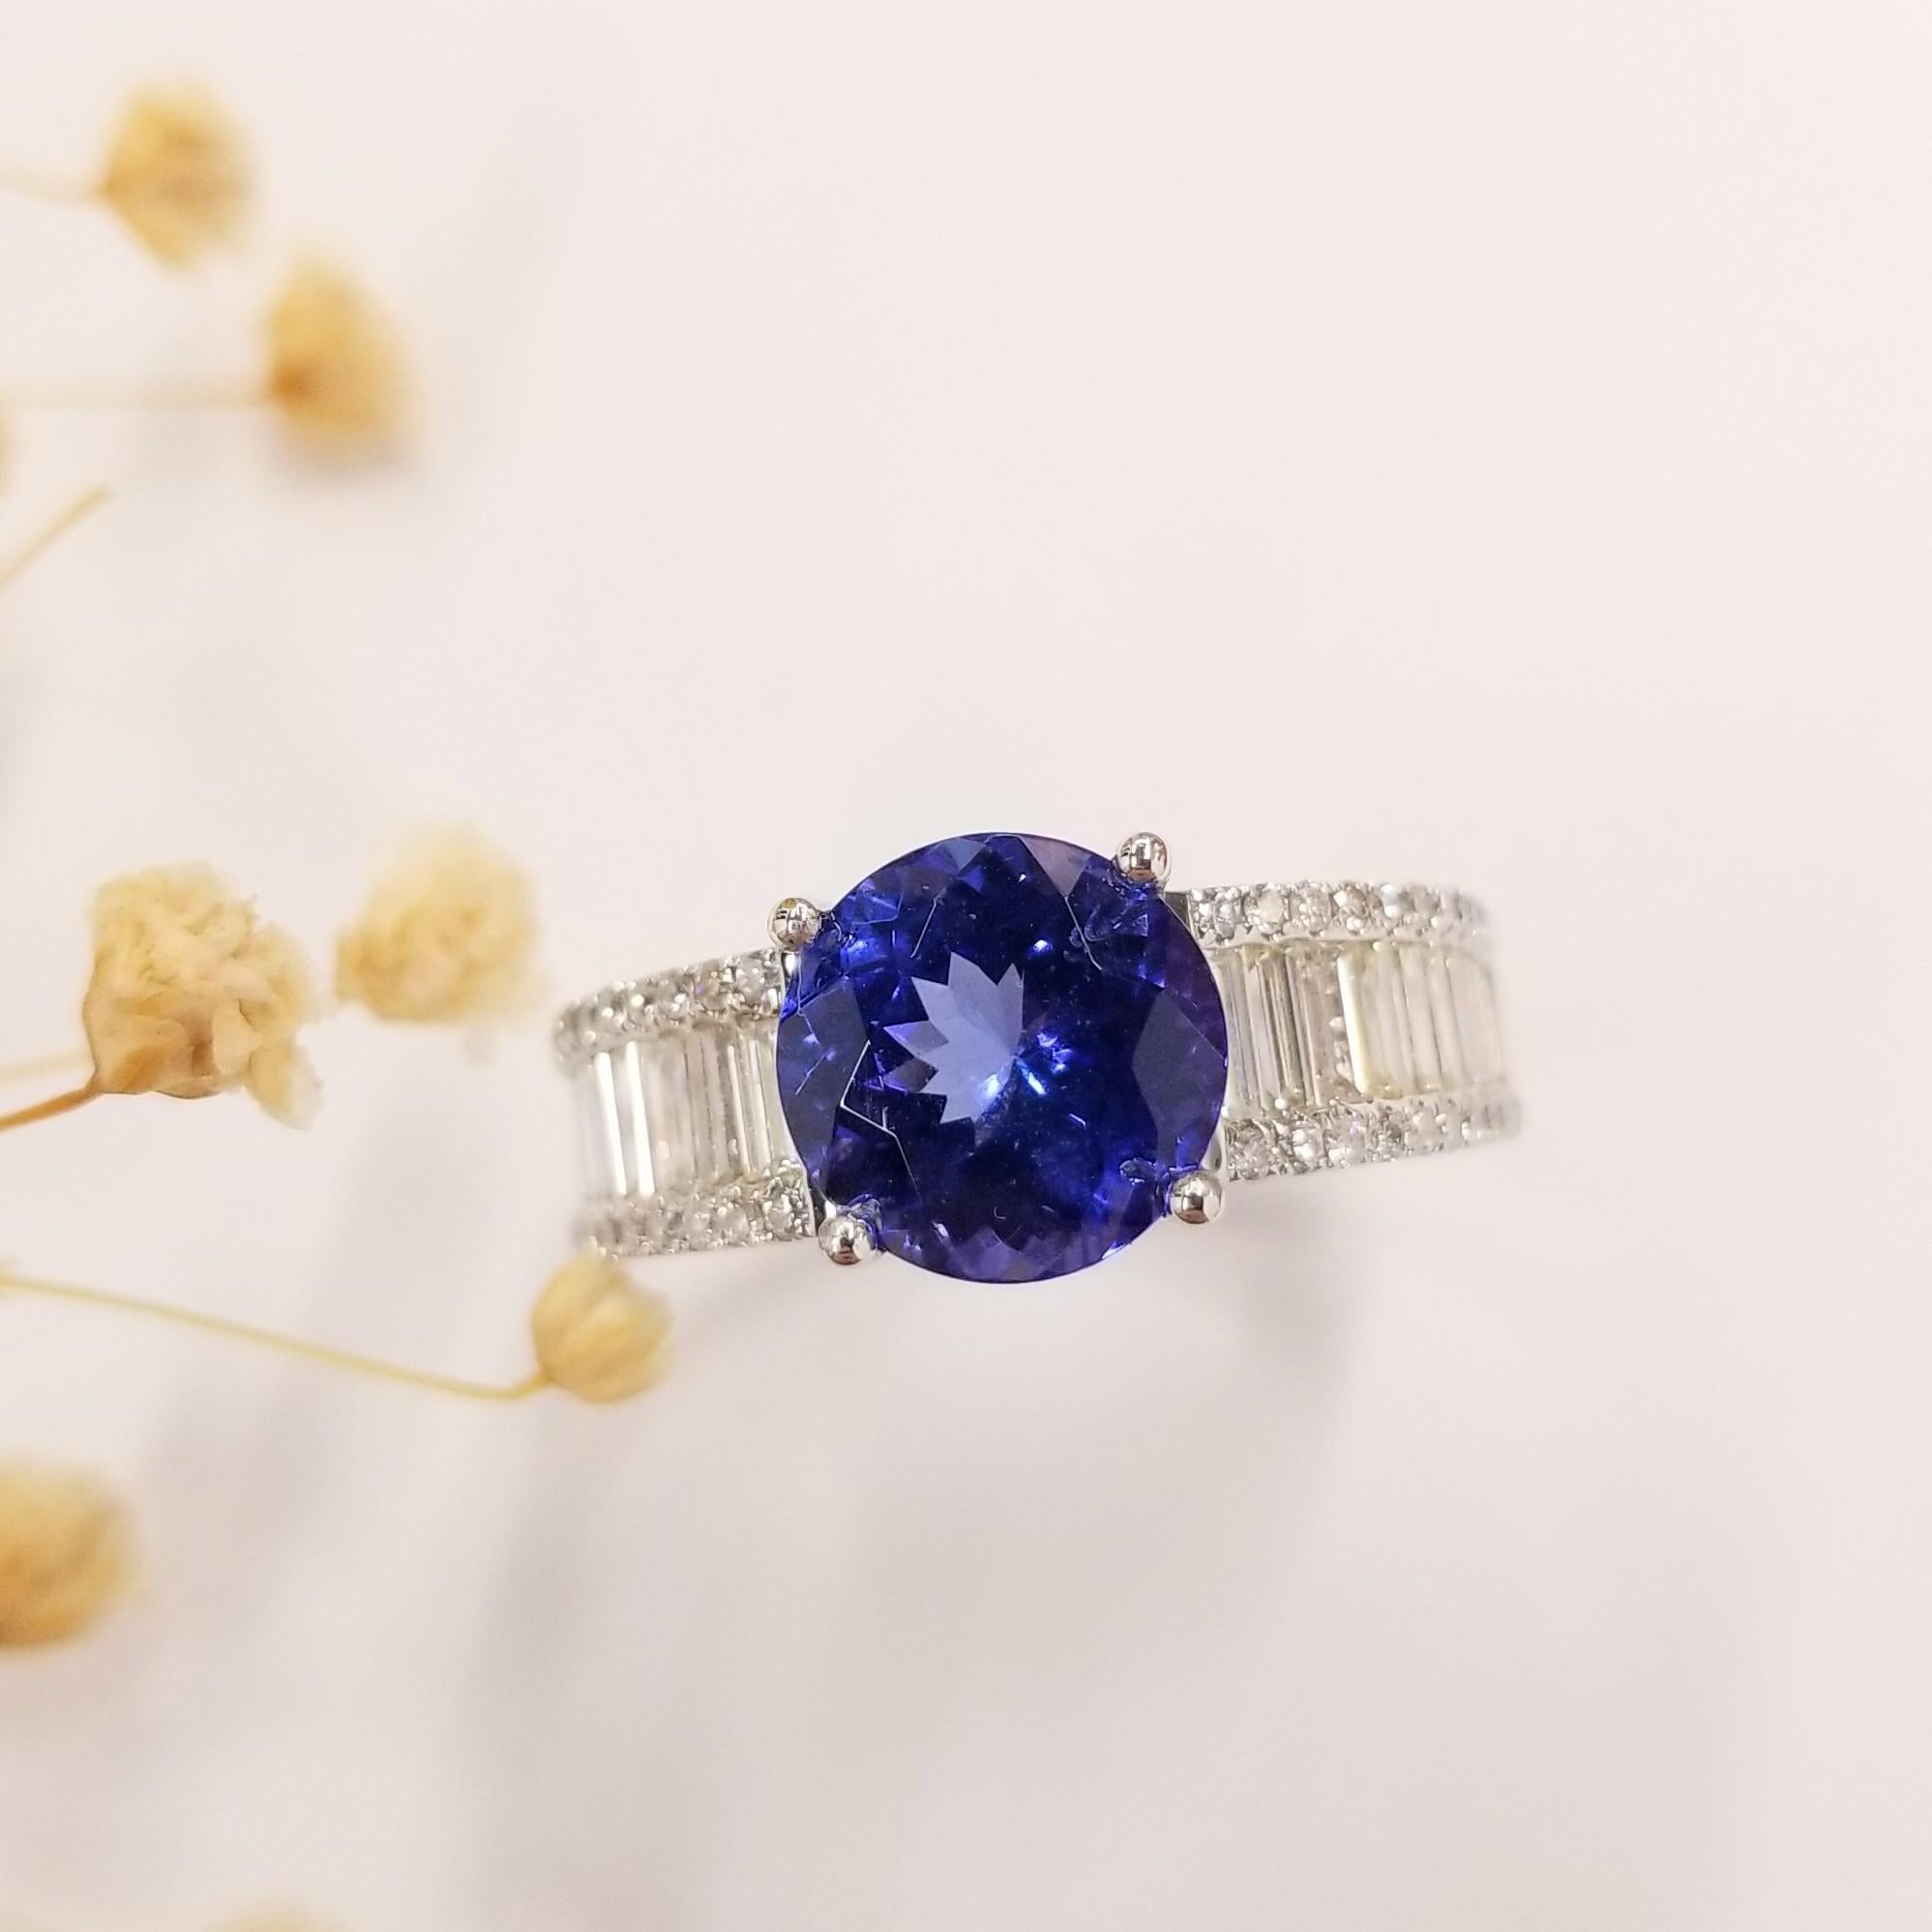 Introducing a remarkable piece of jewelry designed exclusively for men, the EGL Certified 4.09 Carat vivid+violet blue natural Tanzanite in a rare round shape, surrounded by natural diamonds in a modern style ring. Skillfully crafted from 18K White